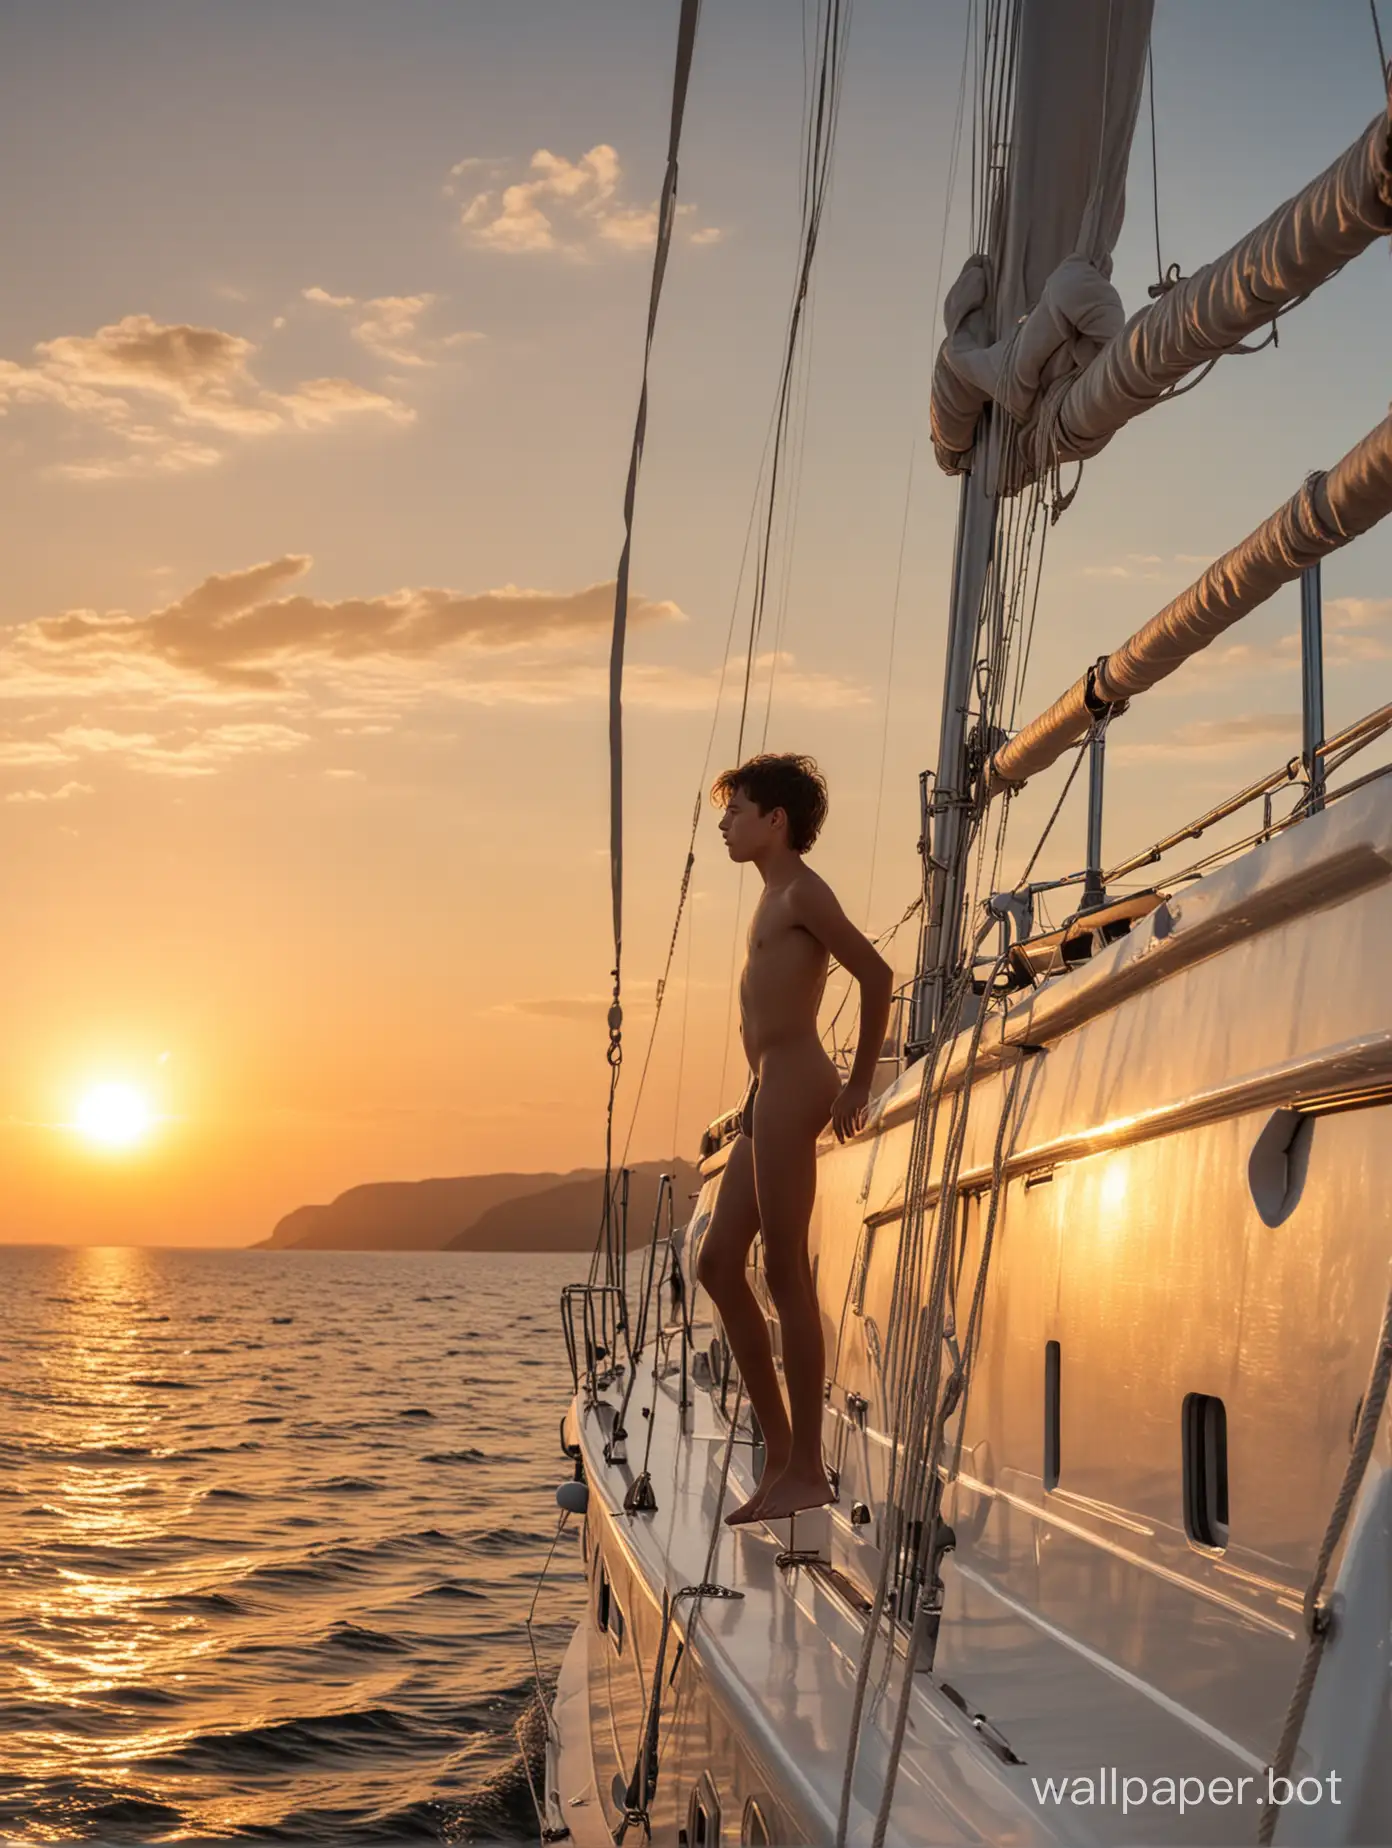 naked boy 13 years old on a yacht at sea, side view, full height, dynamic poses, sunset, yachts, birds